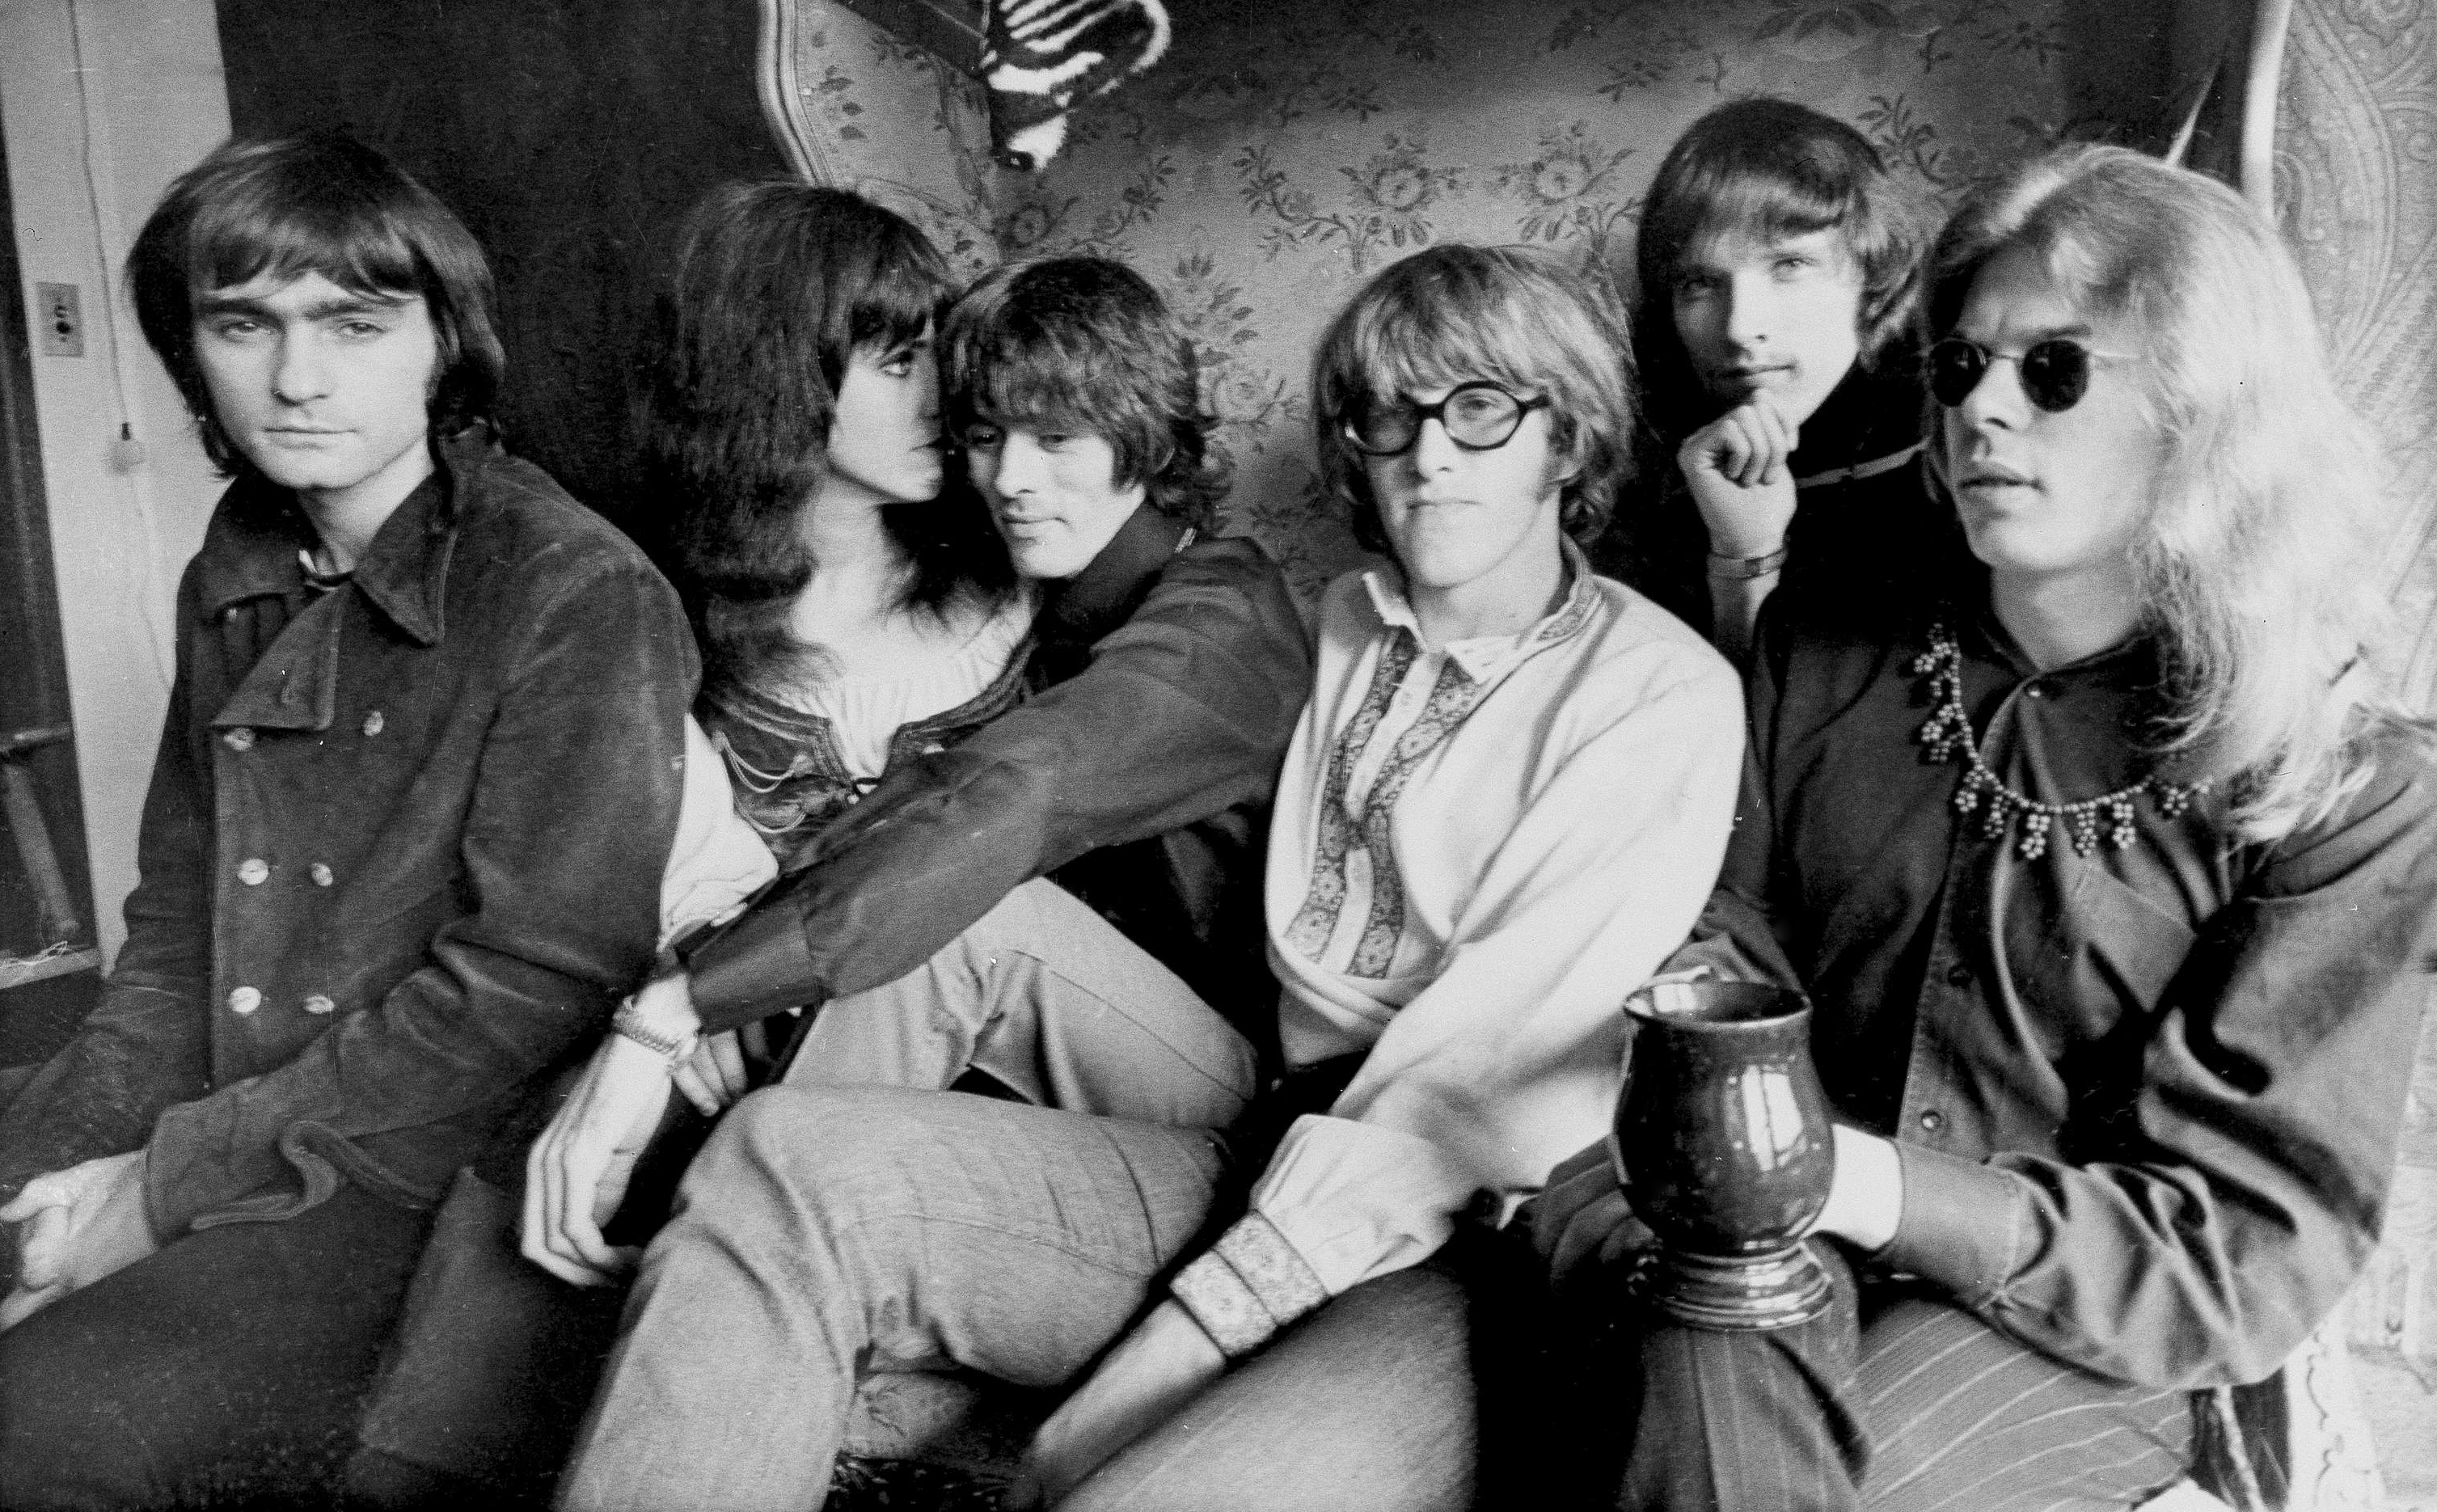 The rock band Jefferson Airplane pose in their Pacific Heights, San Francisco apartment, Dec. 5, 1968. From left: Marty Balin, Grace Slick, Spencer Dryden, Paul Kantner, Jorma Kaukonen and Jack Casady. (AP Photo)